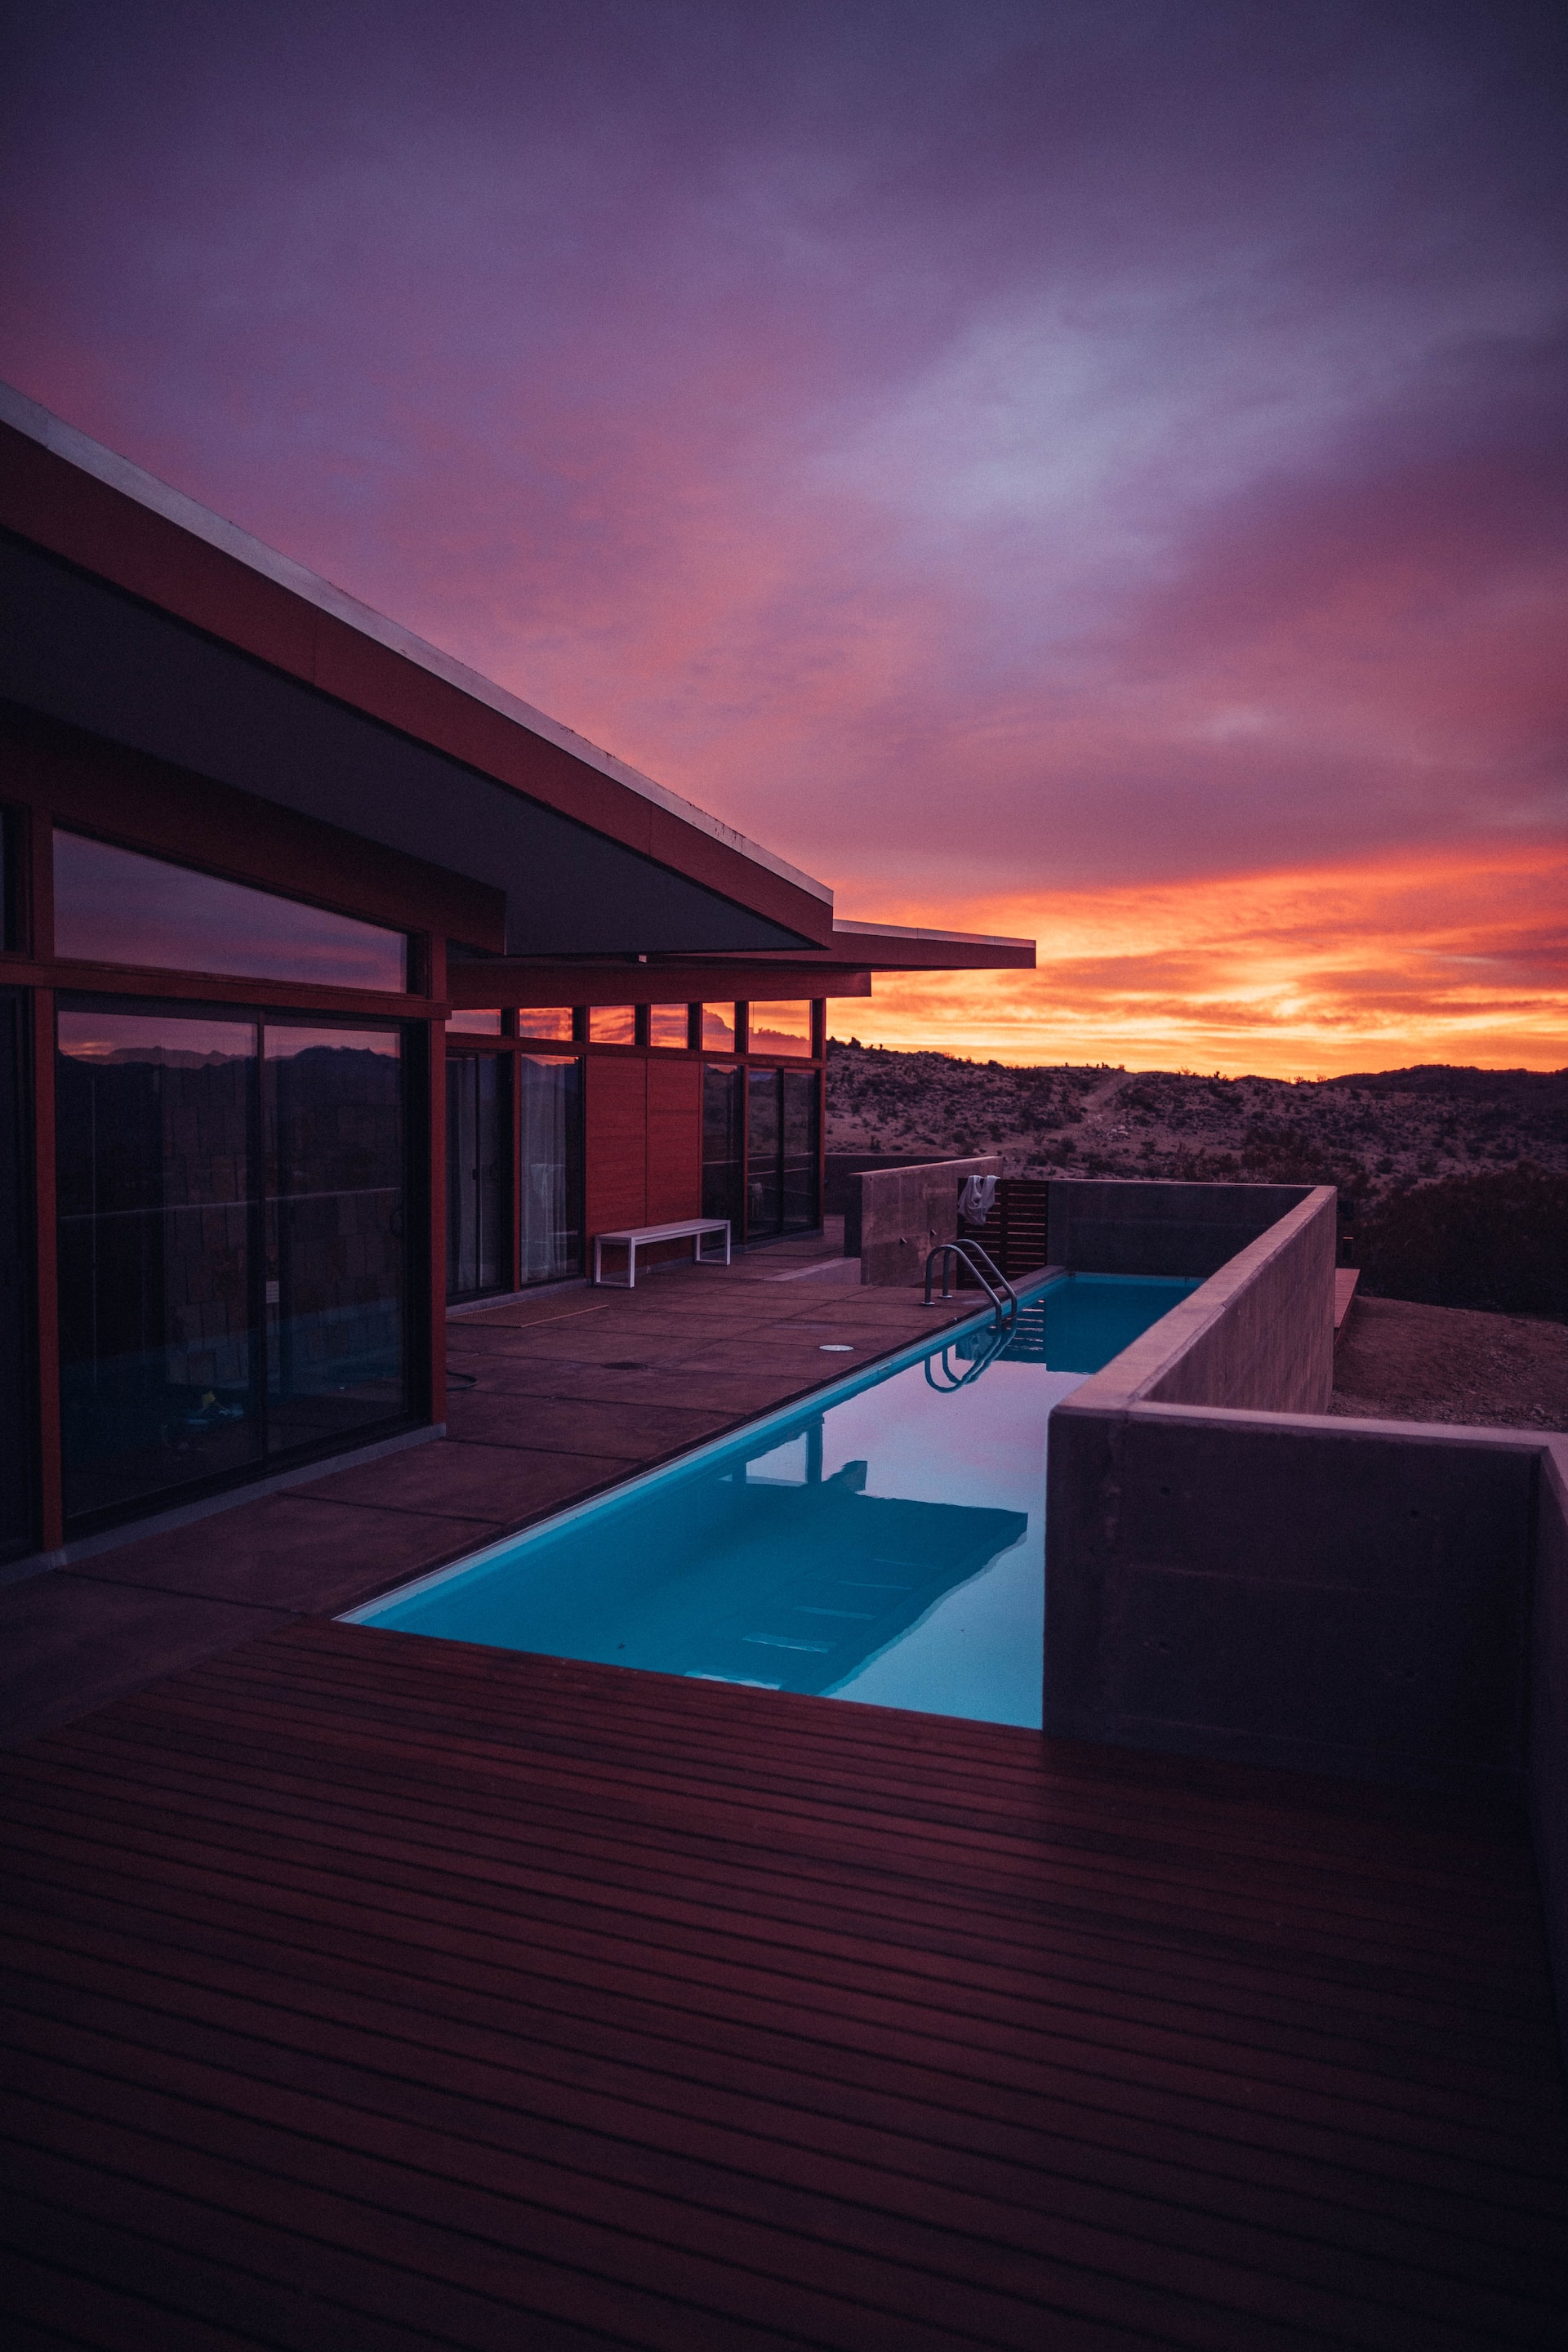 View of the sunset from a home.